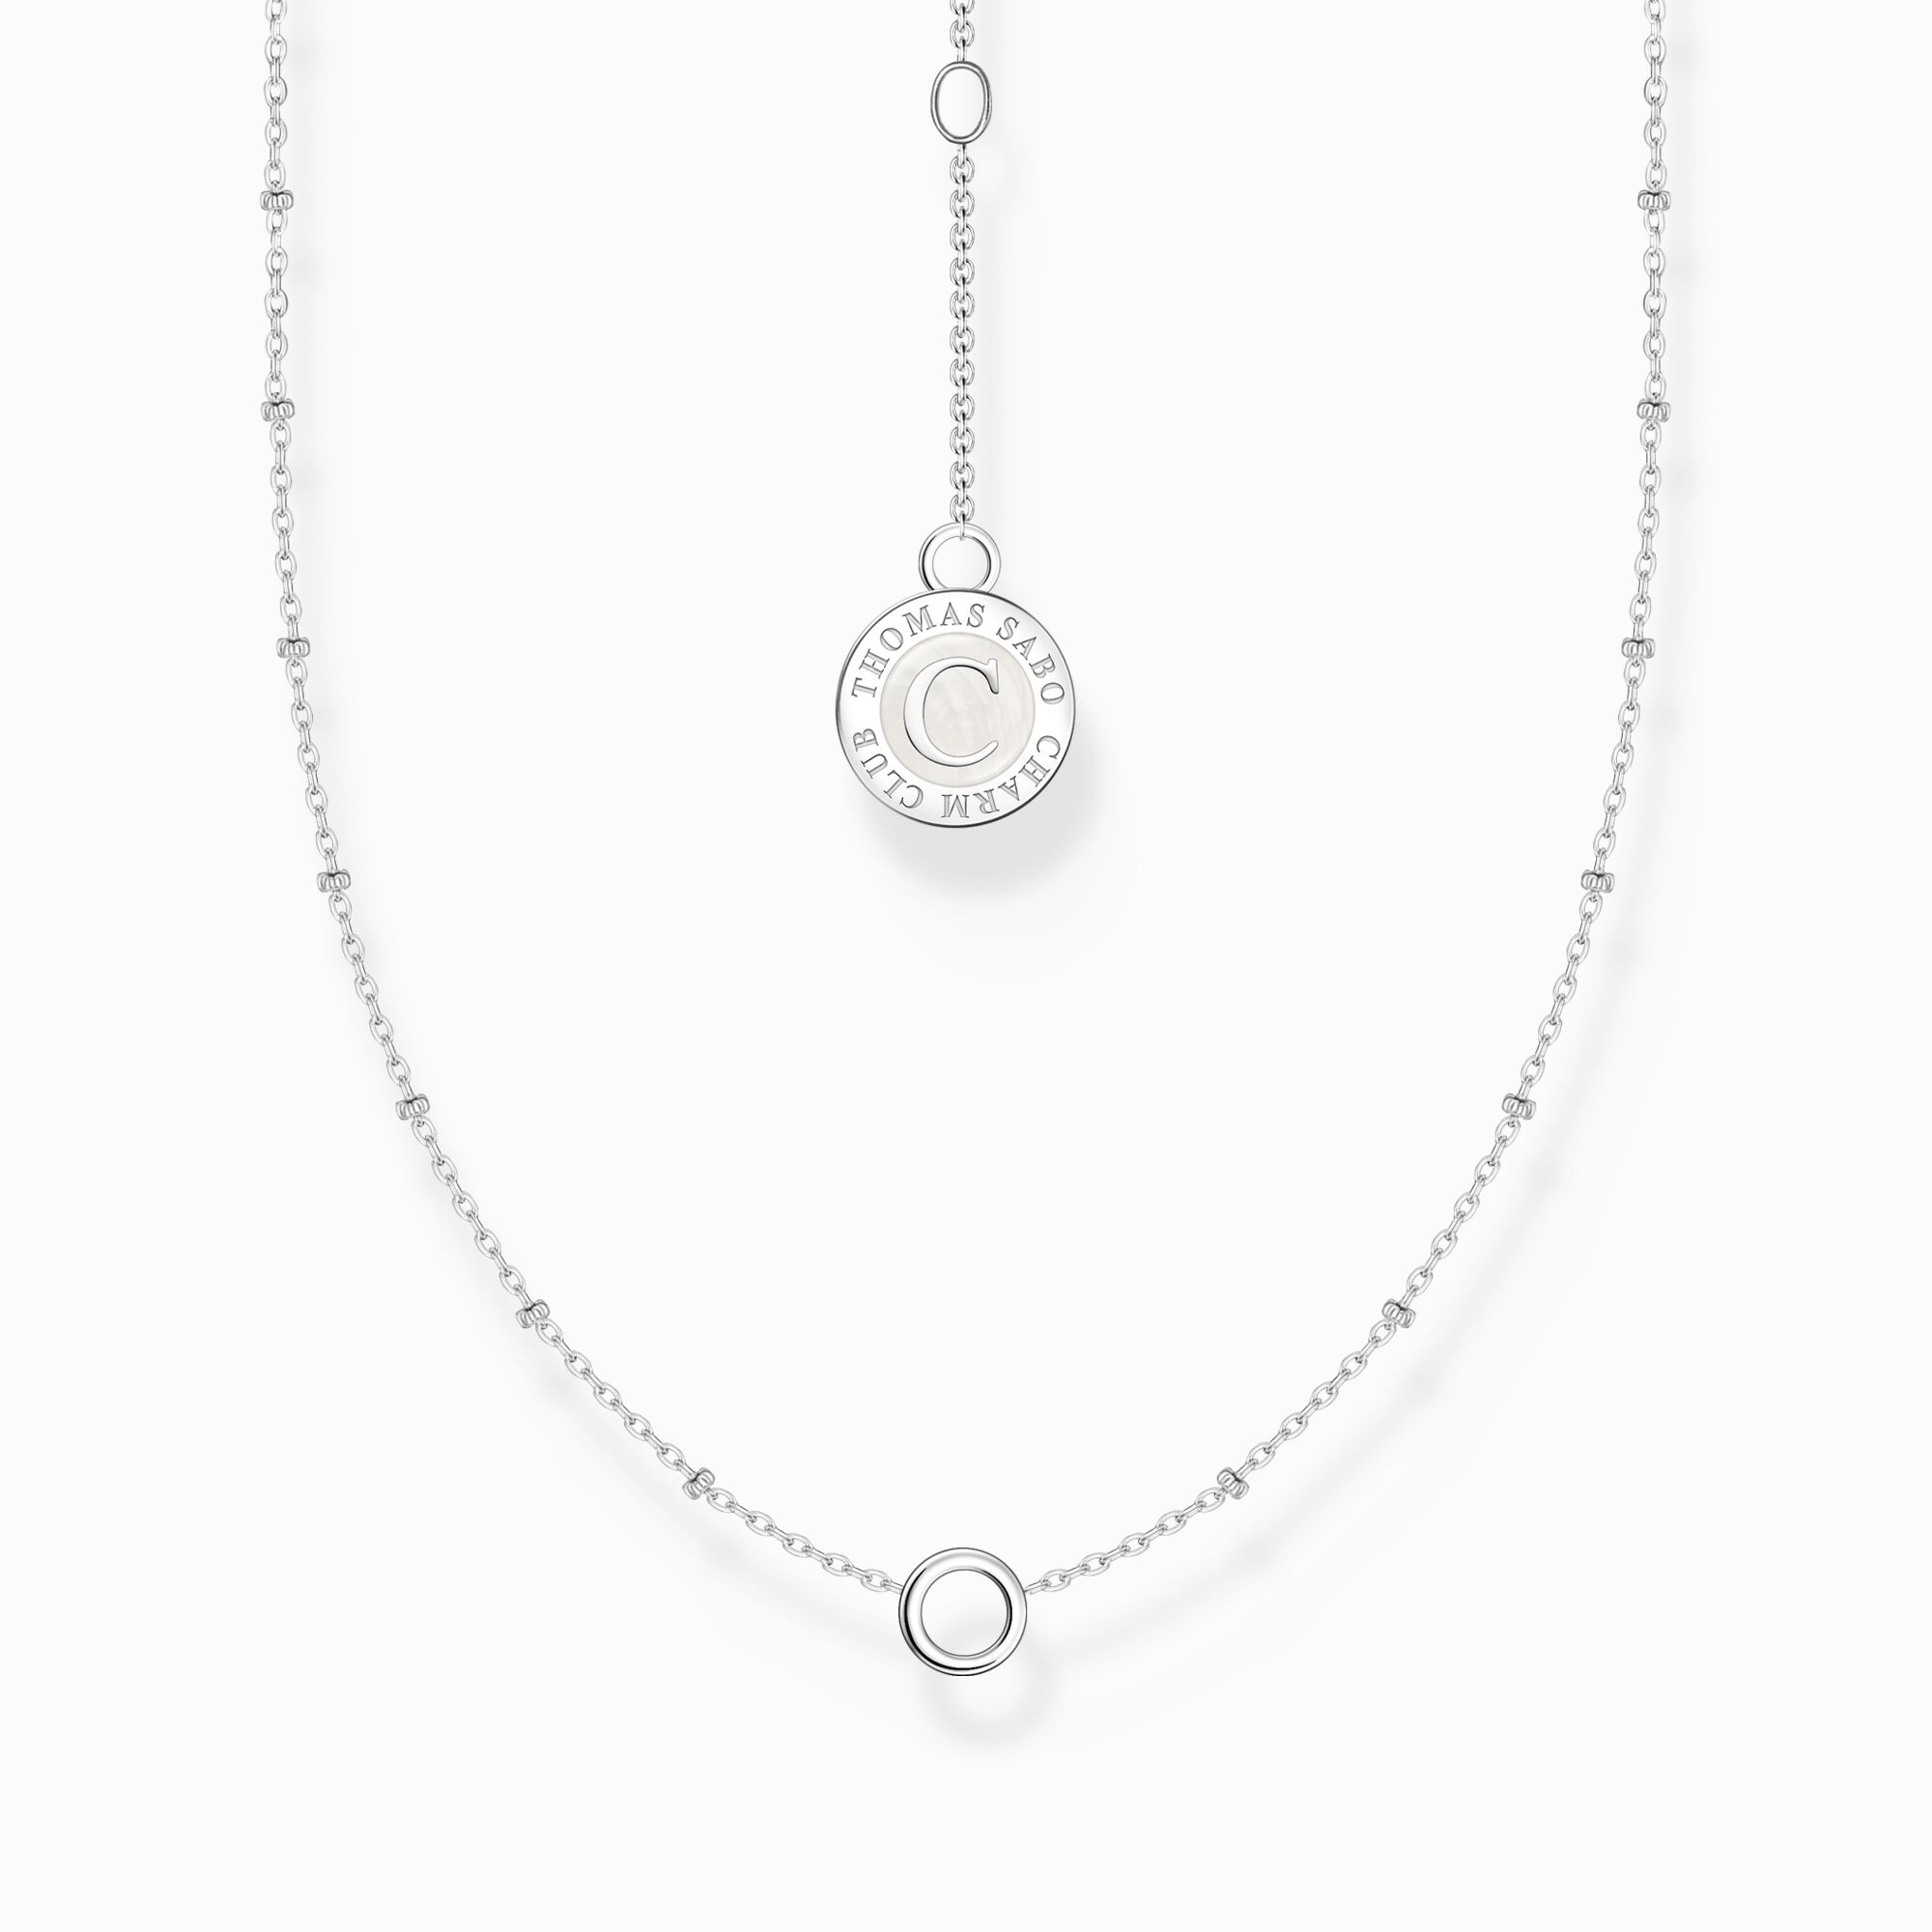 Member Charm necklace with round pendant and little balls silver from the Charm Club collection in the THOMAS SABO online store